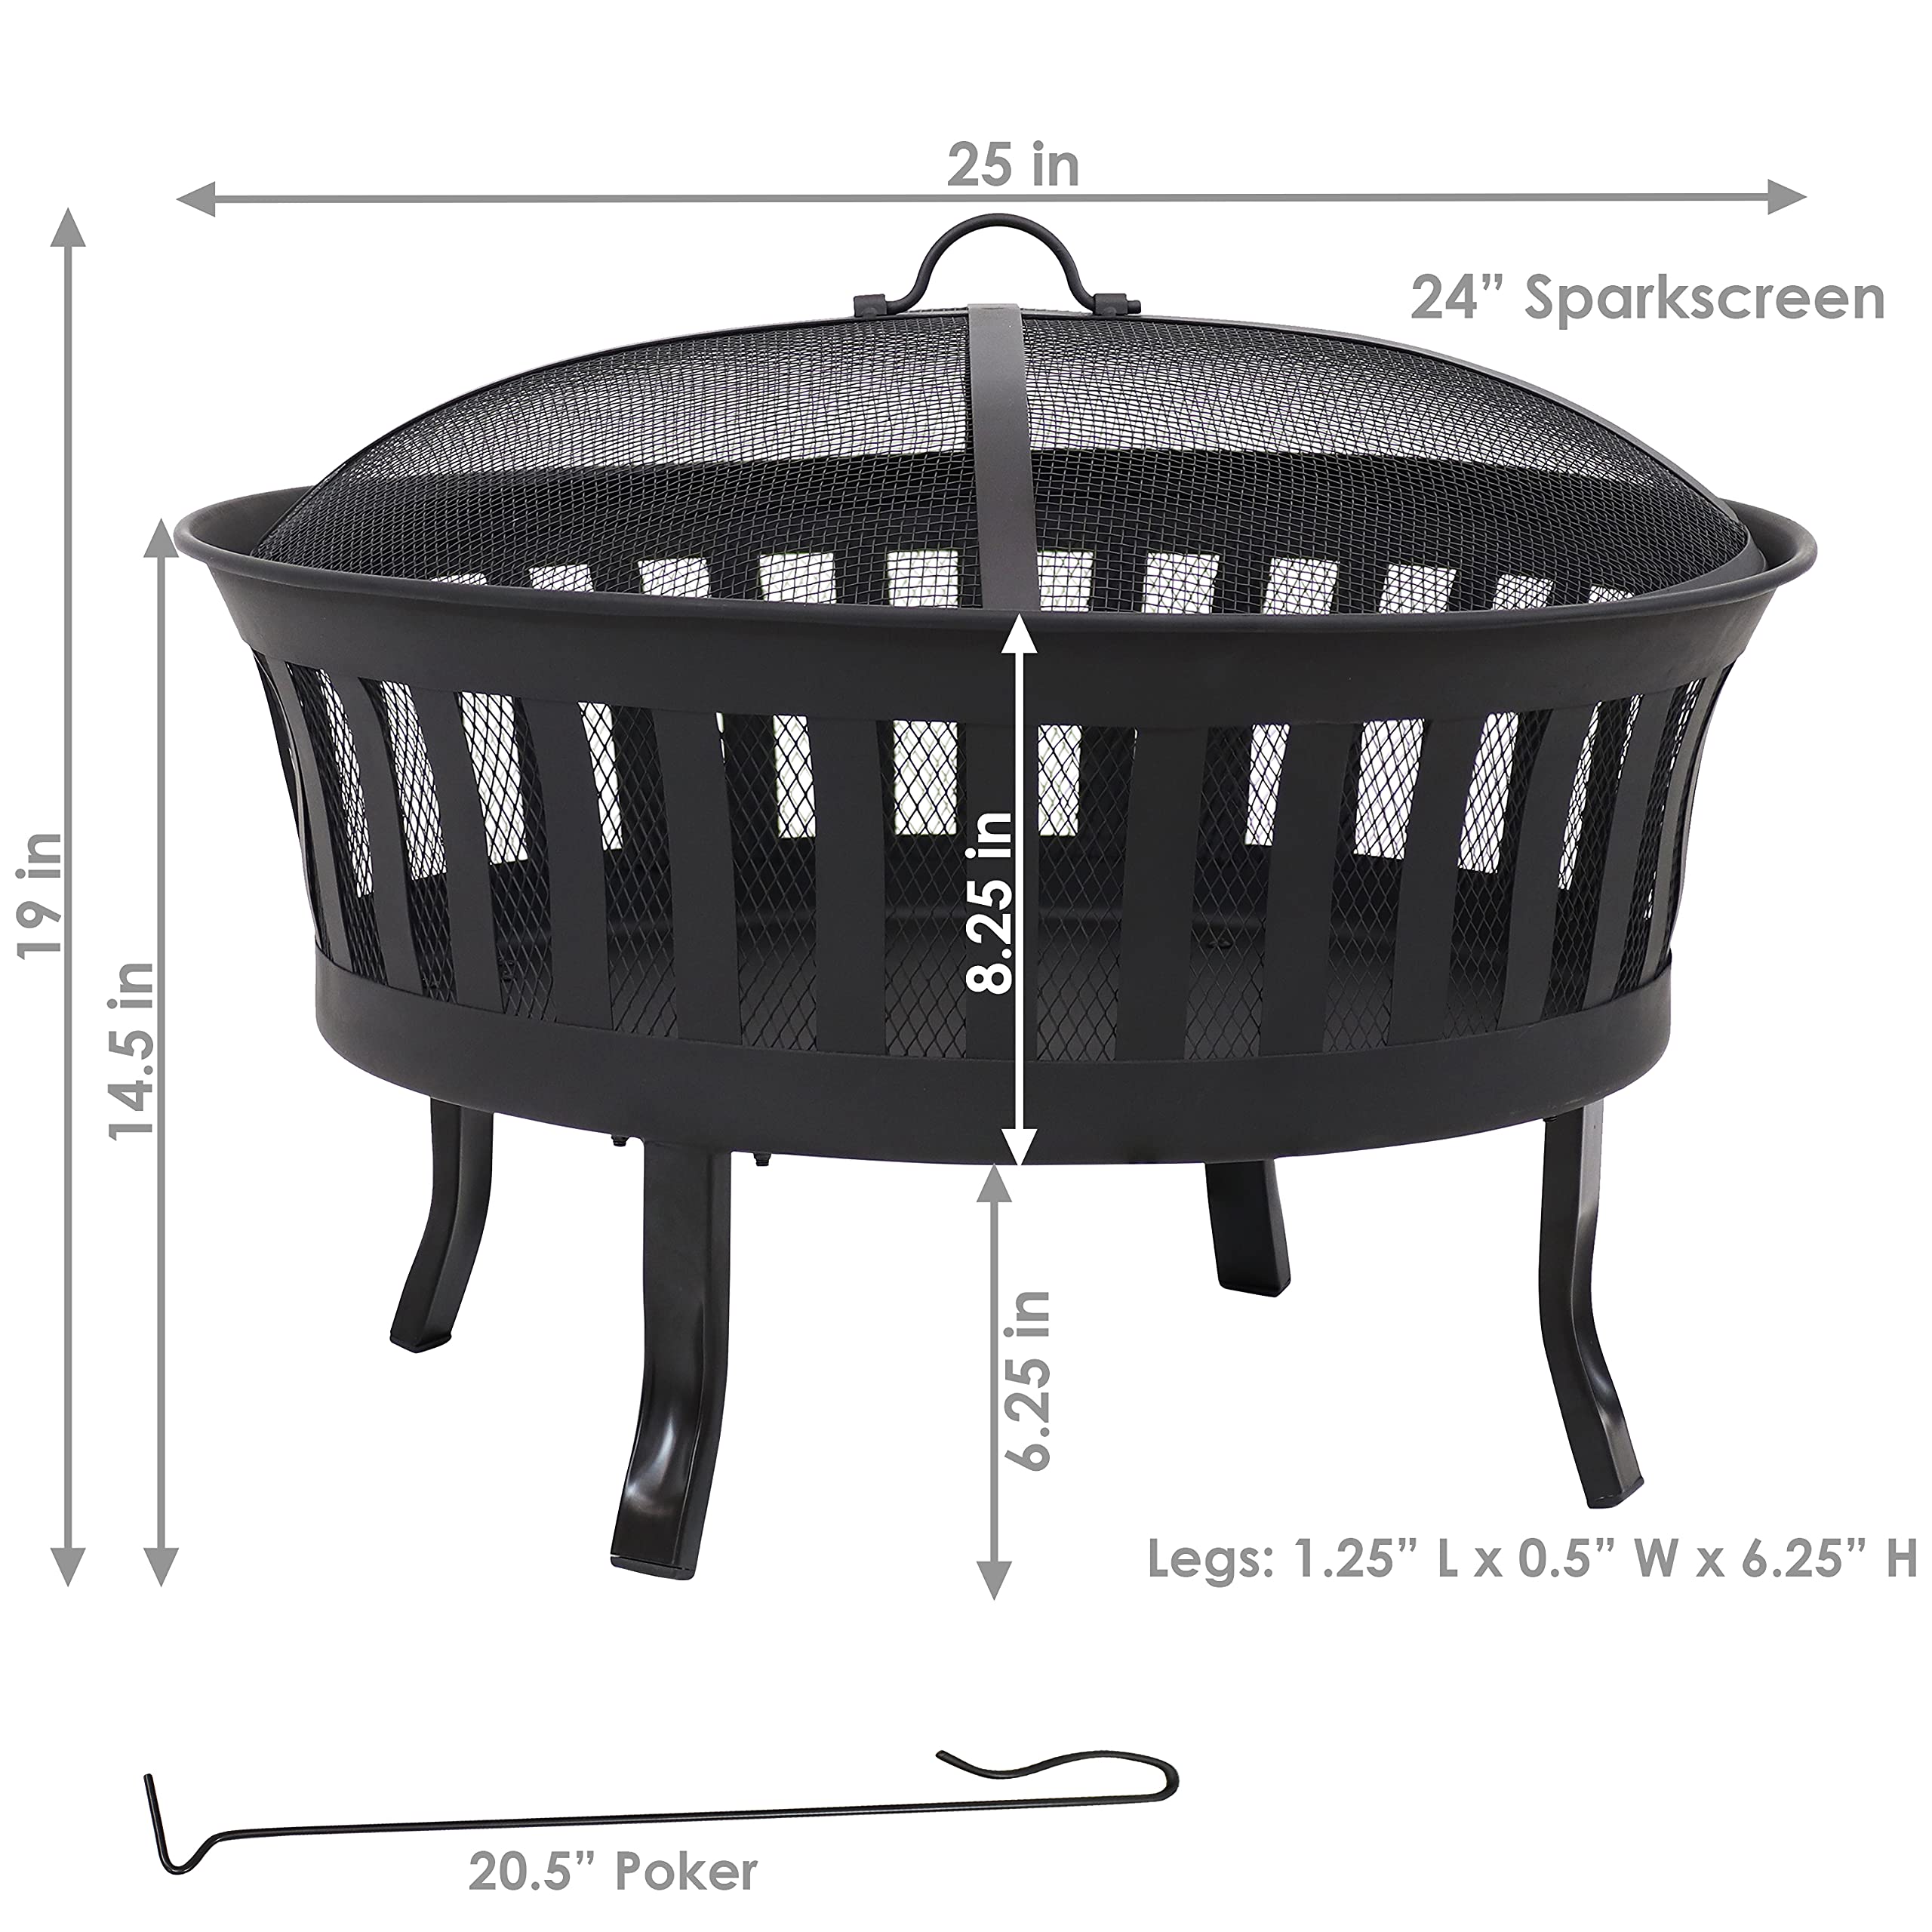 Sunnydaze 25-Inch Steel Wood-Burning Fire Pit with Mesh Stripe Cutouts - Includes Poker and Spark Screen